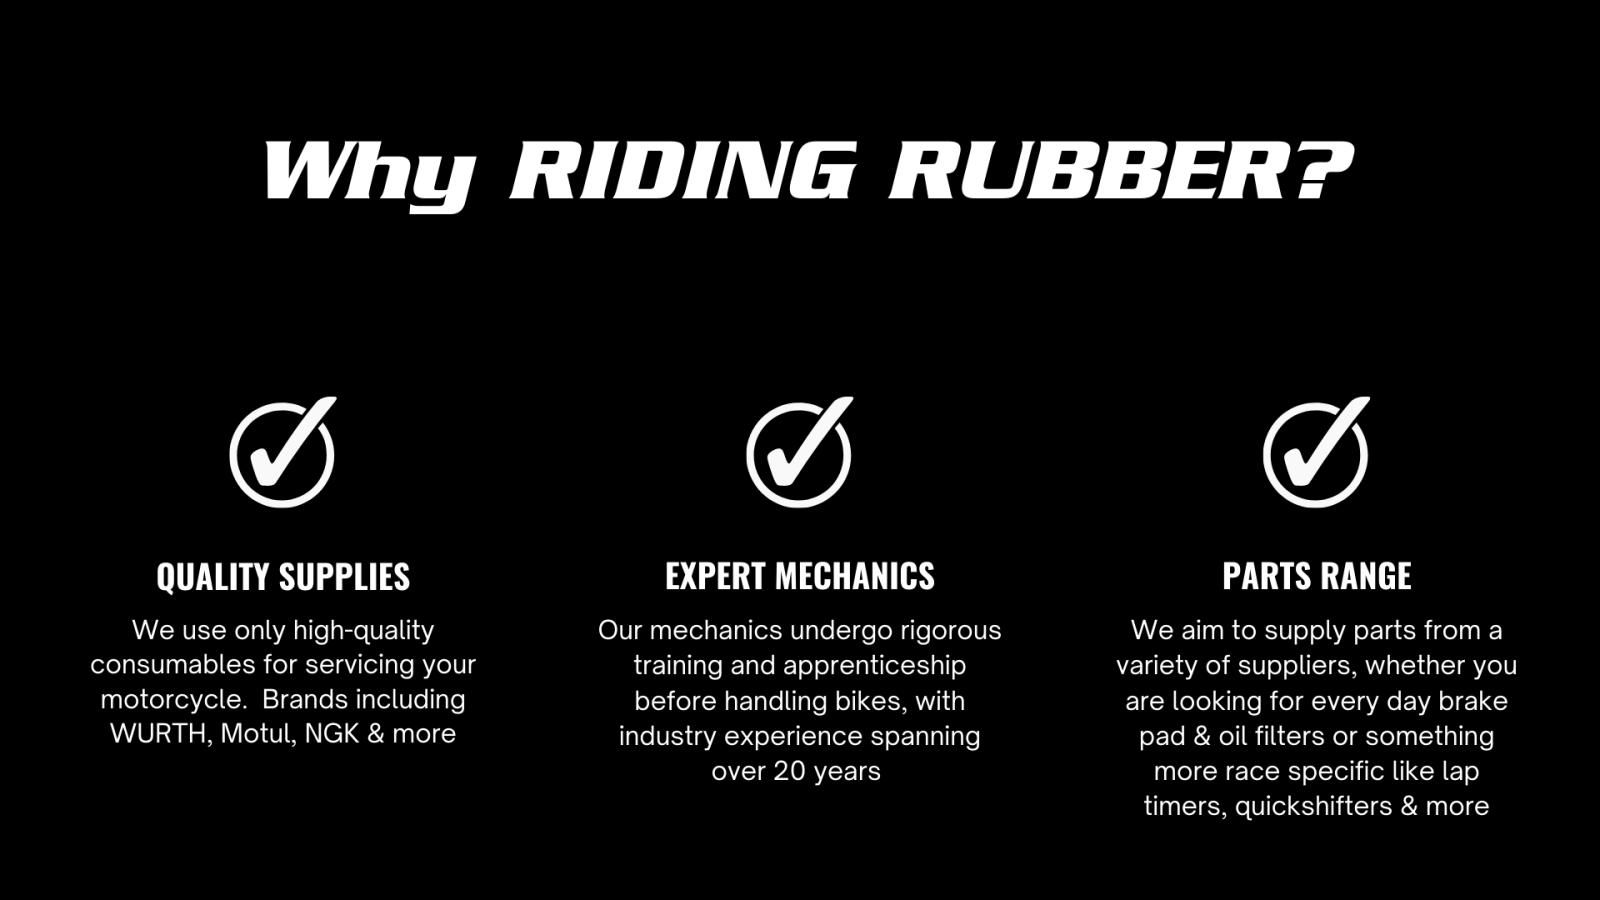 Why RIDING RUBBER? We use only high-quality consumables for servicing your motorcycle.  Brands including WURTH, Motul, NGK & more. Our mechanics undergo rigorous training and apprenticeship before handling bikes, with industry experience spanning over 20 years. We aim to supply parts from a variety of suppliers, whether you are looking for every day brake pad & oil filters or something more race specific like lap timers, quickshifters & more